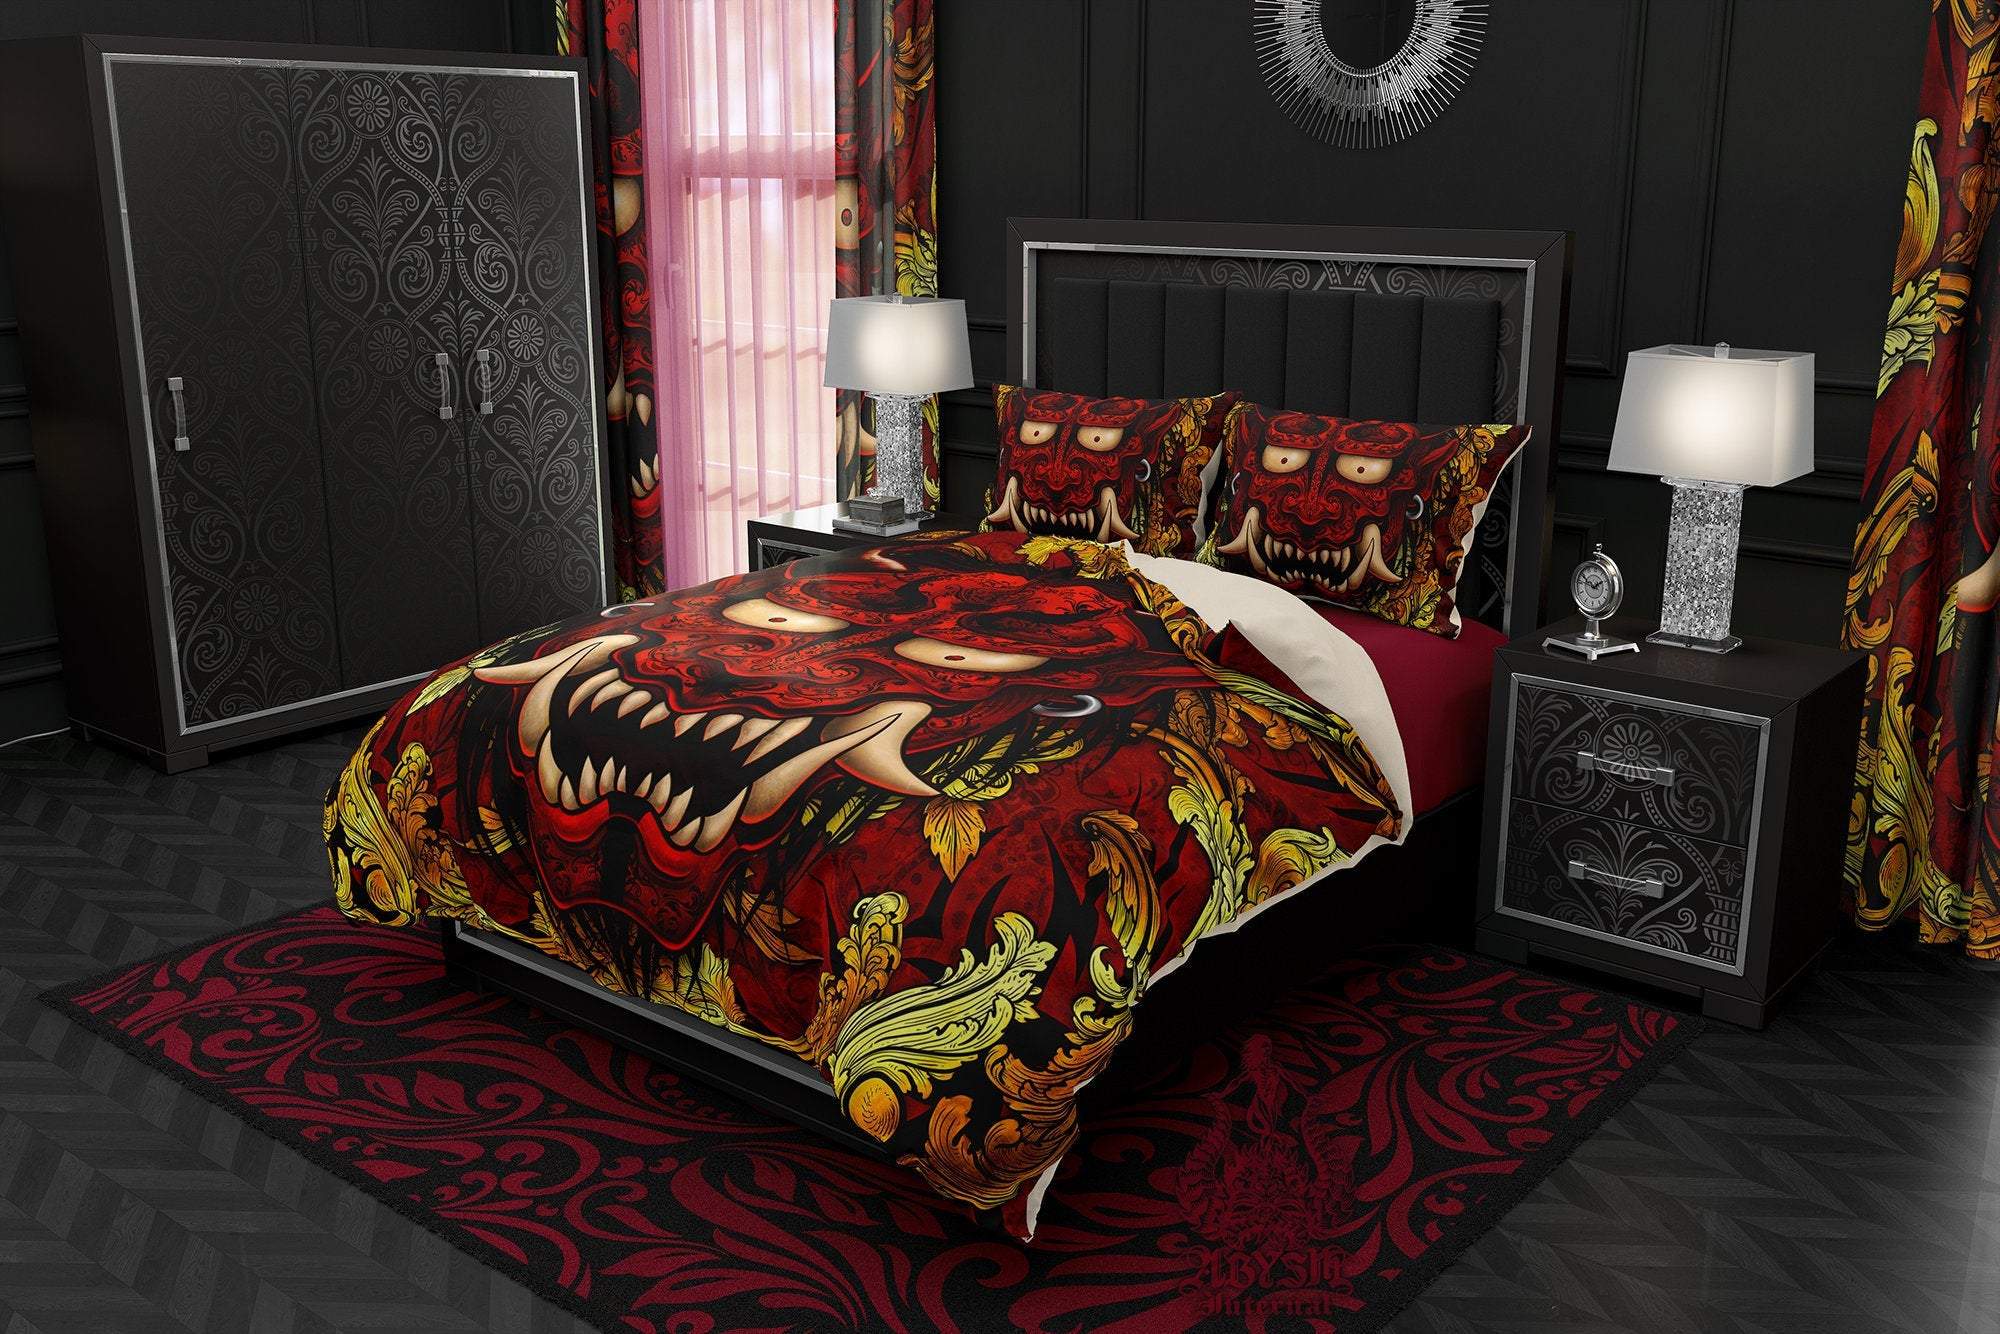 Oni Bedding Set, Comforter and Duvet, Anime Bed Cover and Bedroom Decor, King, Queen and Twin Size - Gold and Red, Japanese Demon - Abysm Internal